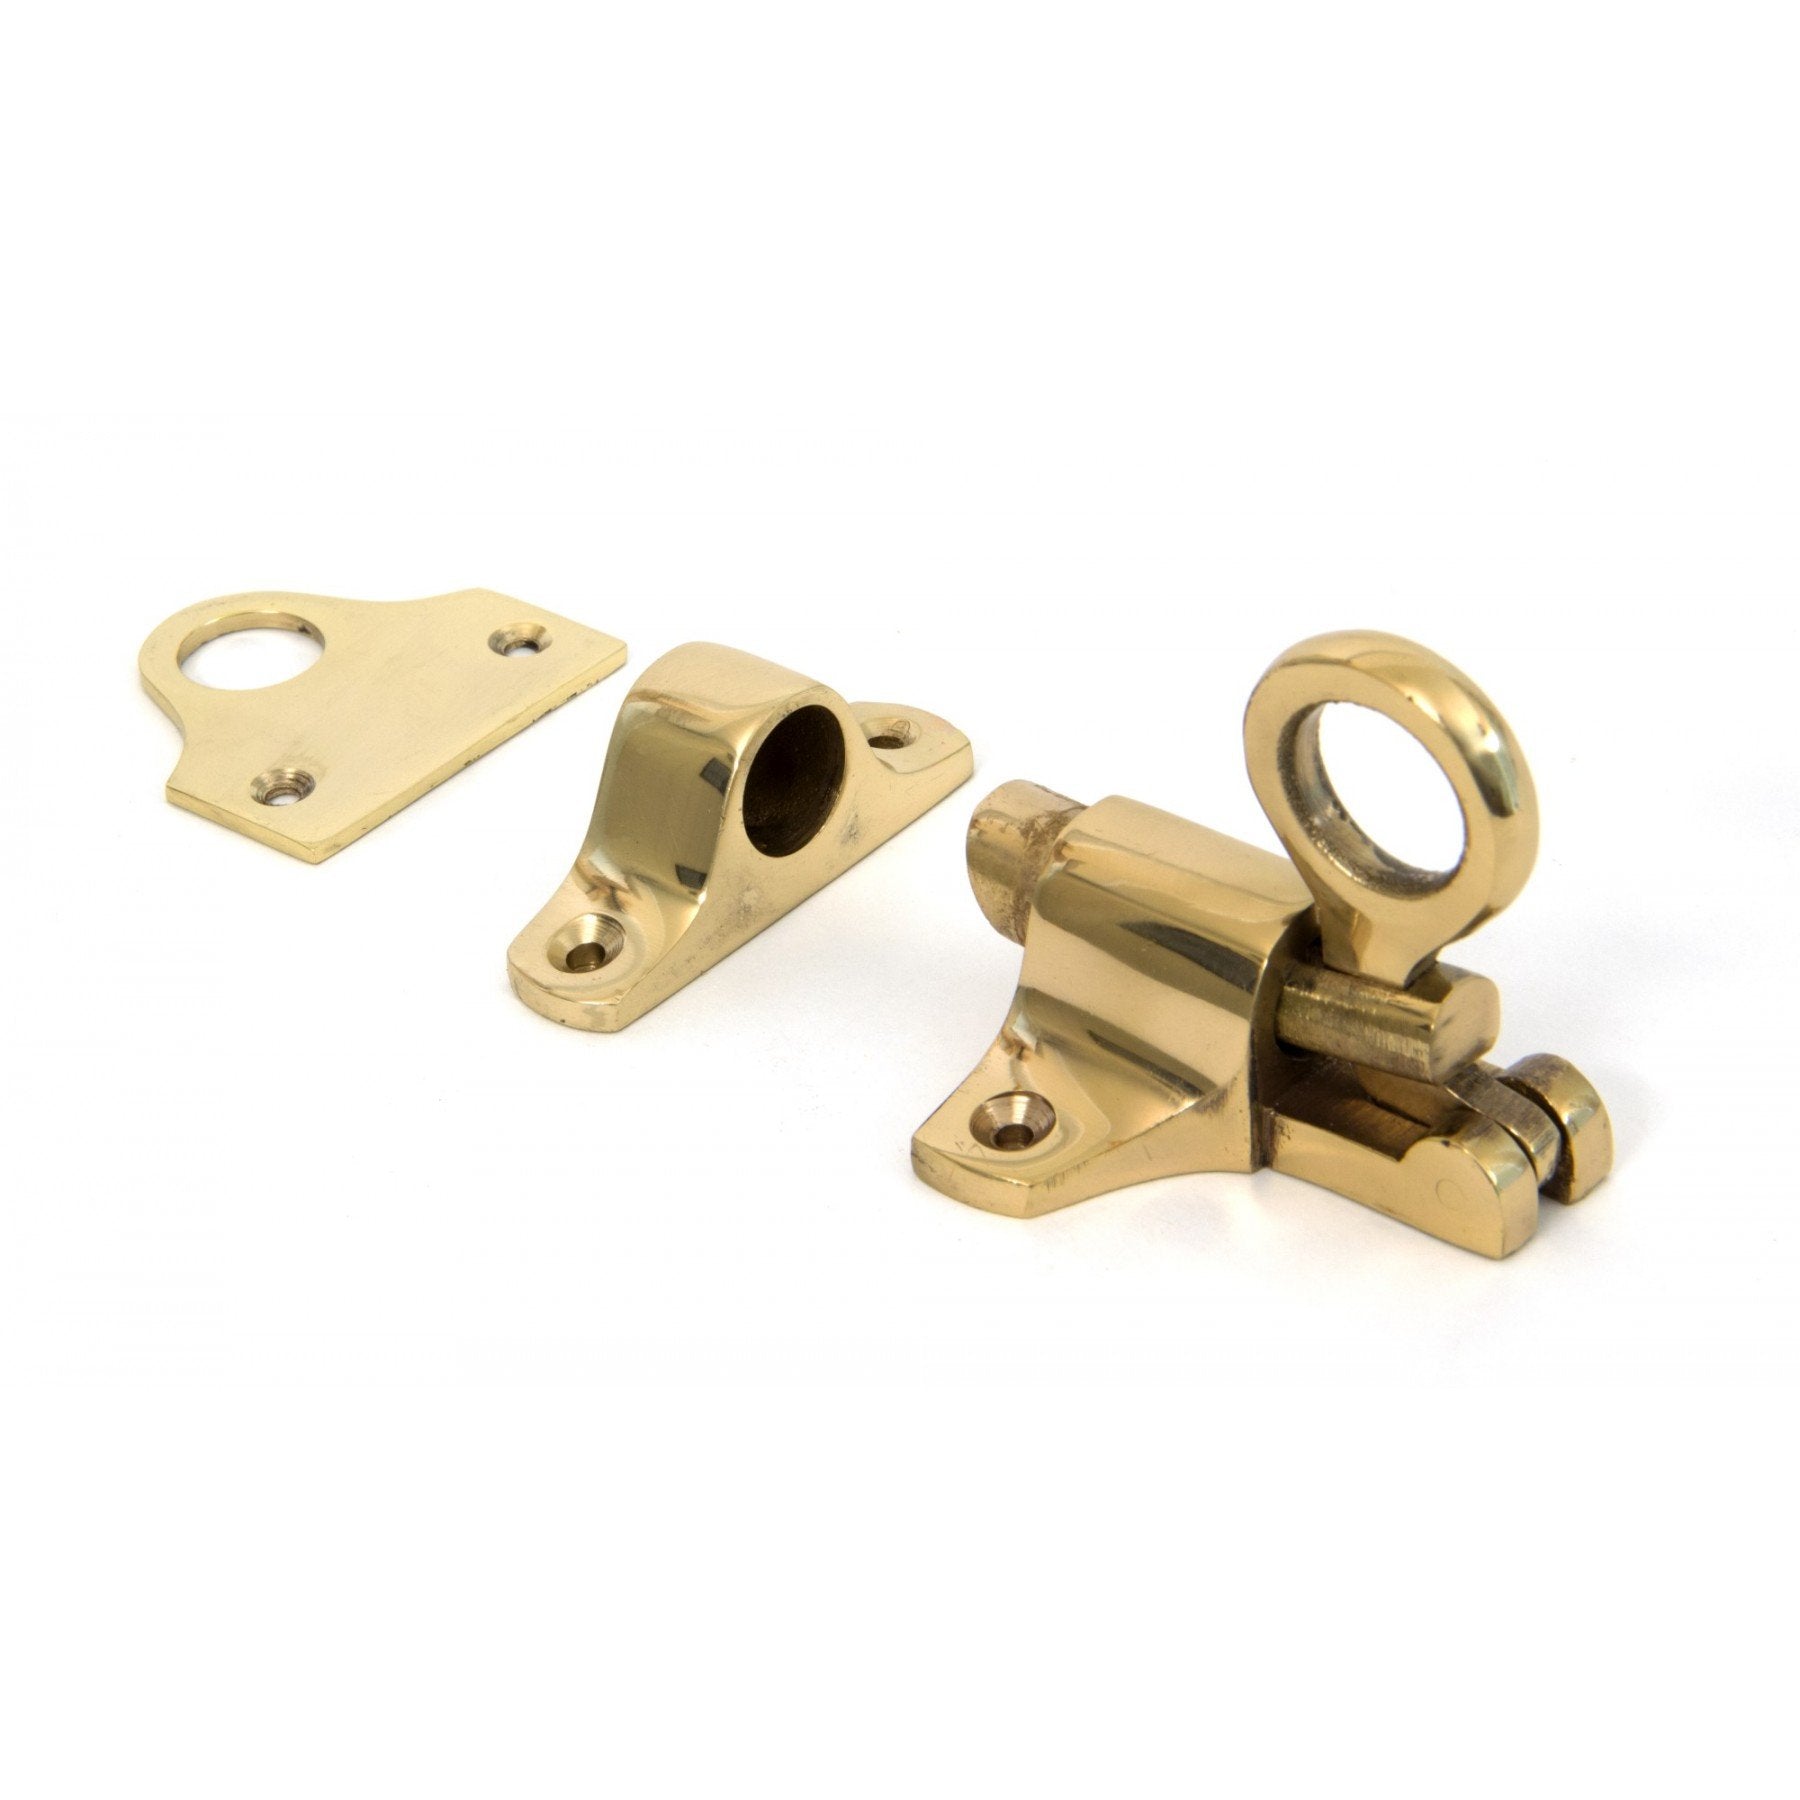 From the Anvil Polished Brass Lacquered Fanlight Catch & Two Keeps - No.42 Interiors